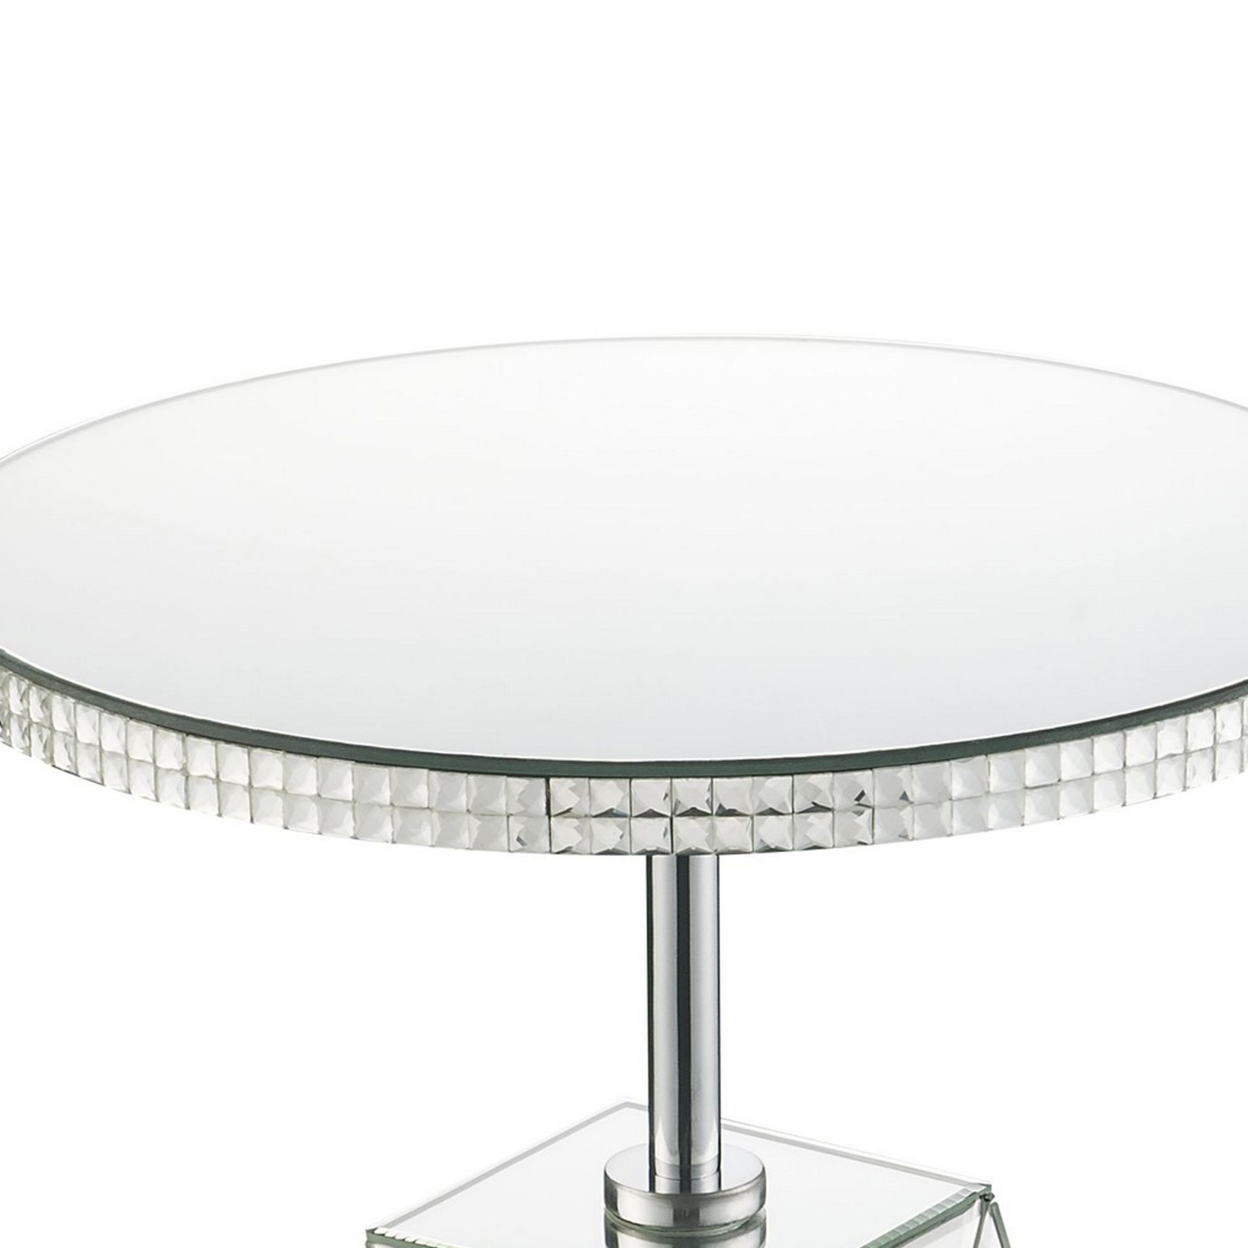 Round Mirrored Accent Table With Pedestal Base And Glass Top, Silver- Saltoro Sherpi